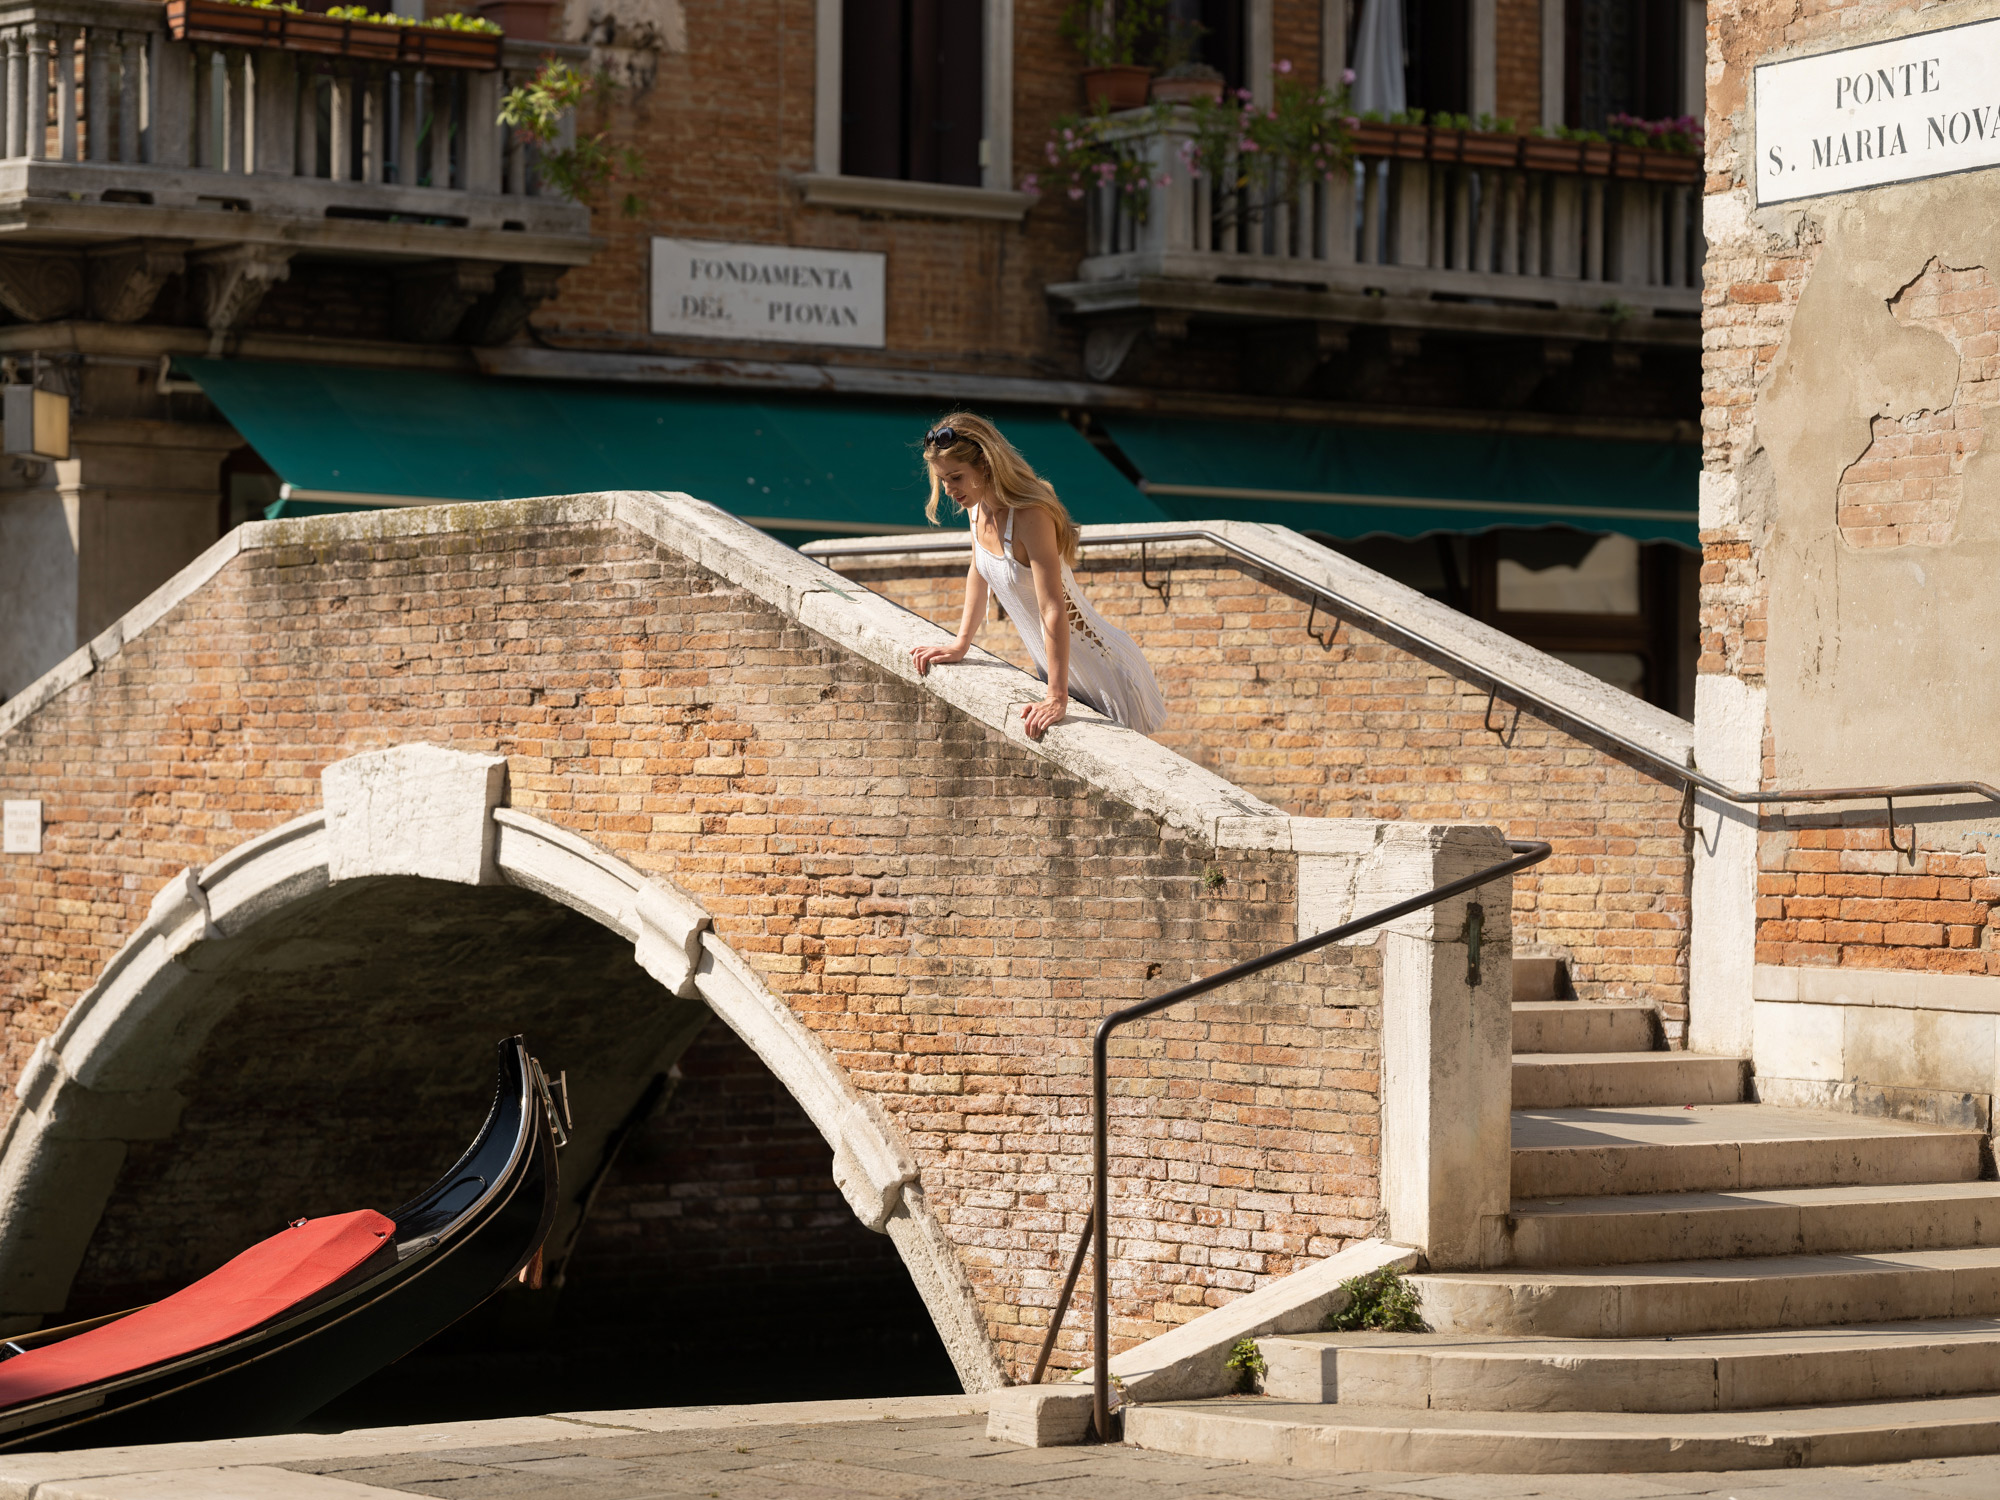 48 hours in Venice with the Fujifilm GFX100 ~ High res samples